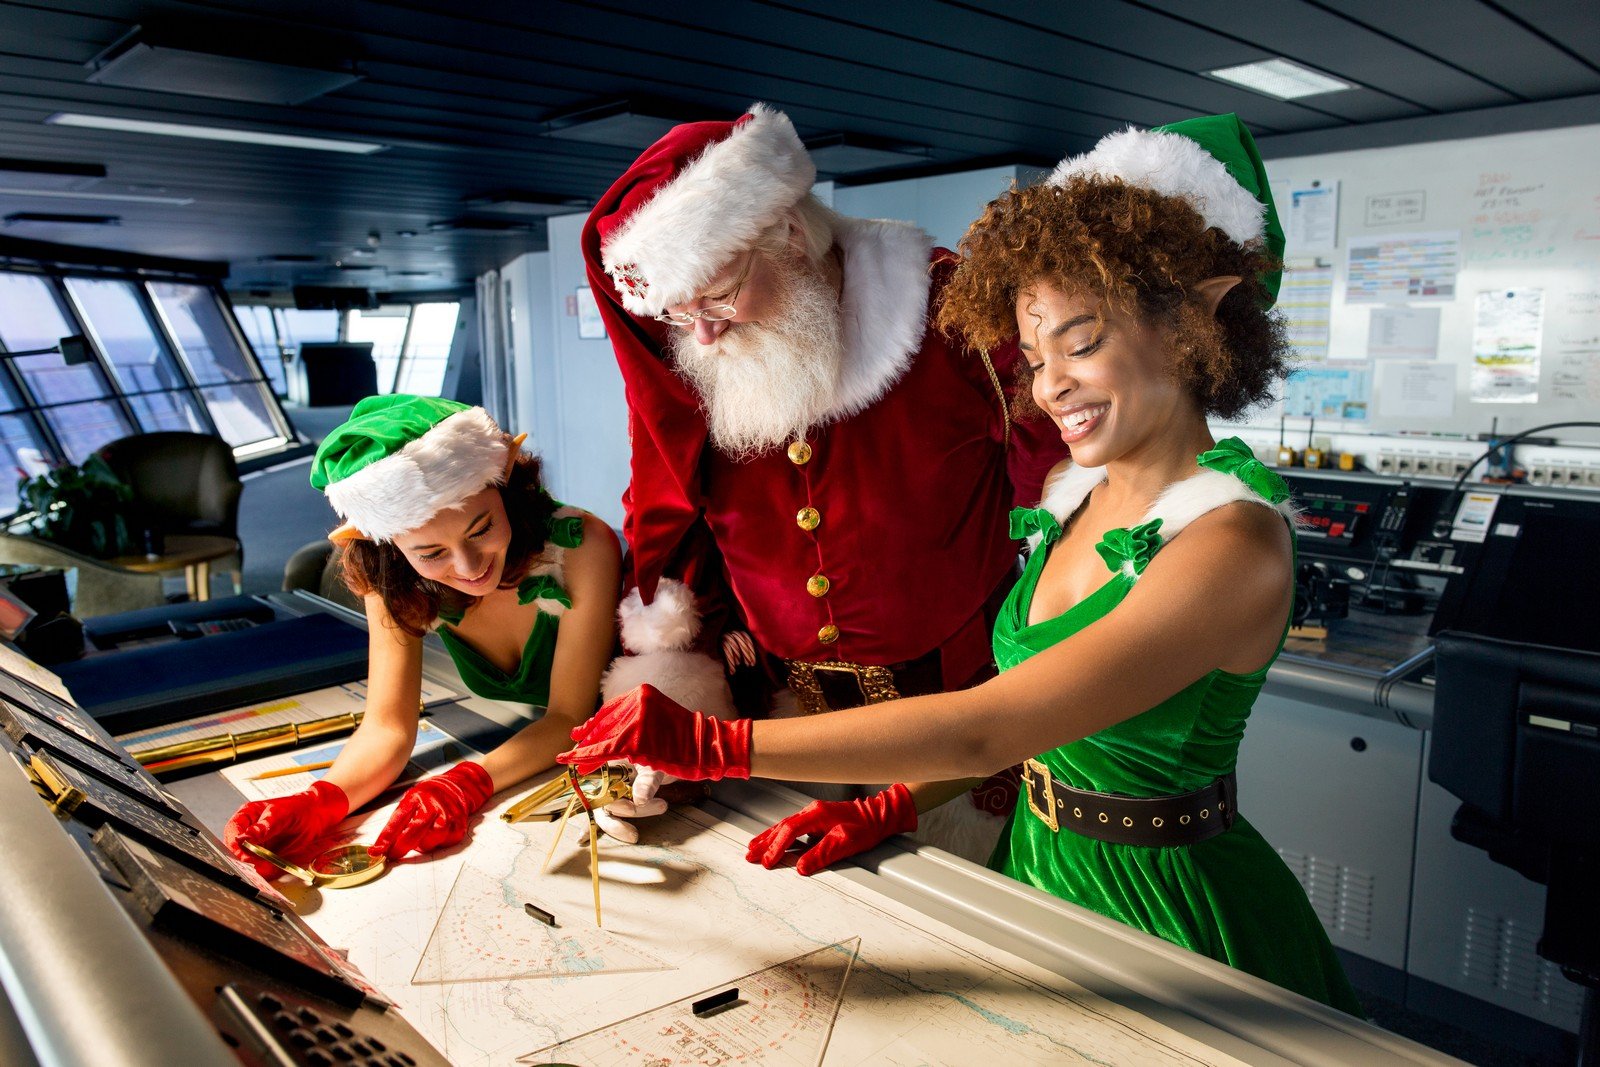 How Royal Caribbean celebrates Christmas and New Years holidays on its